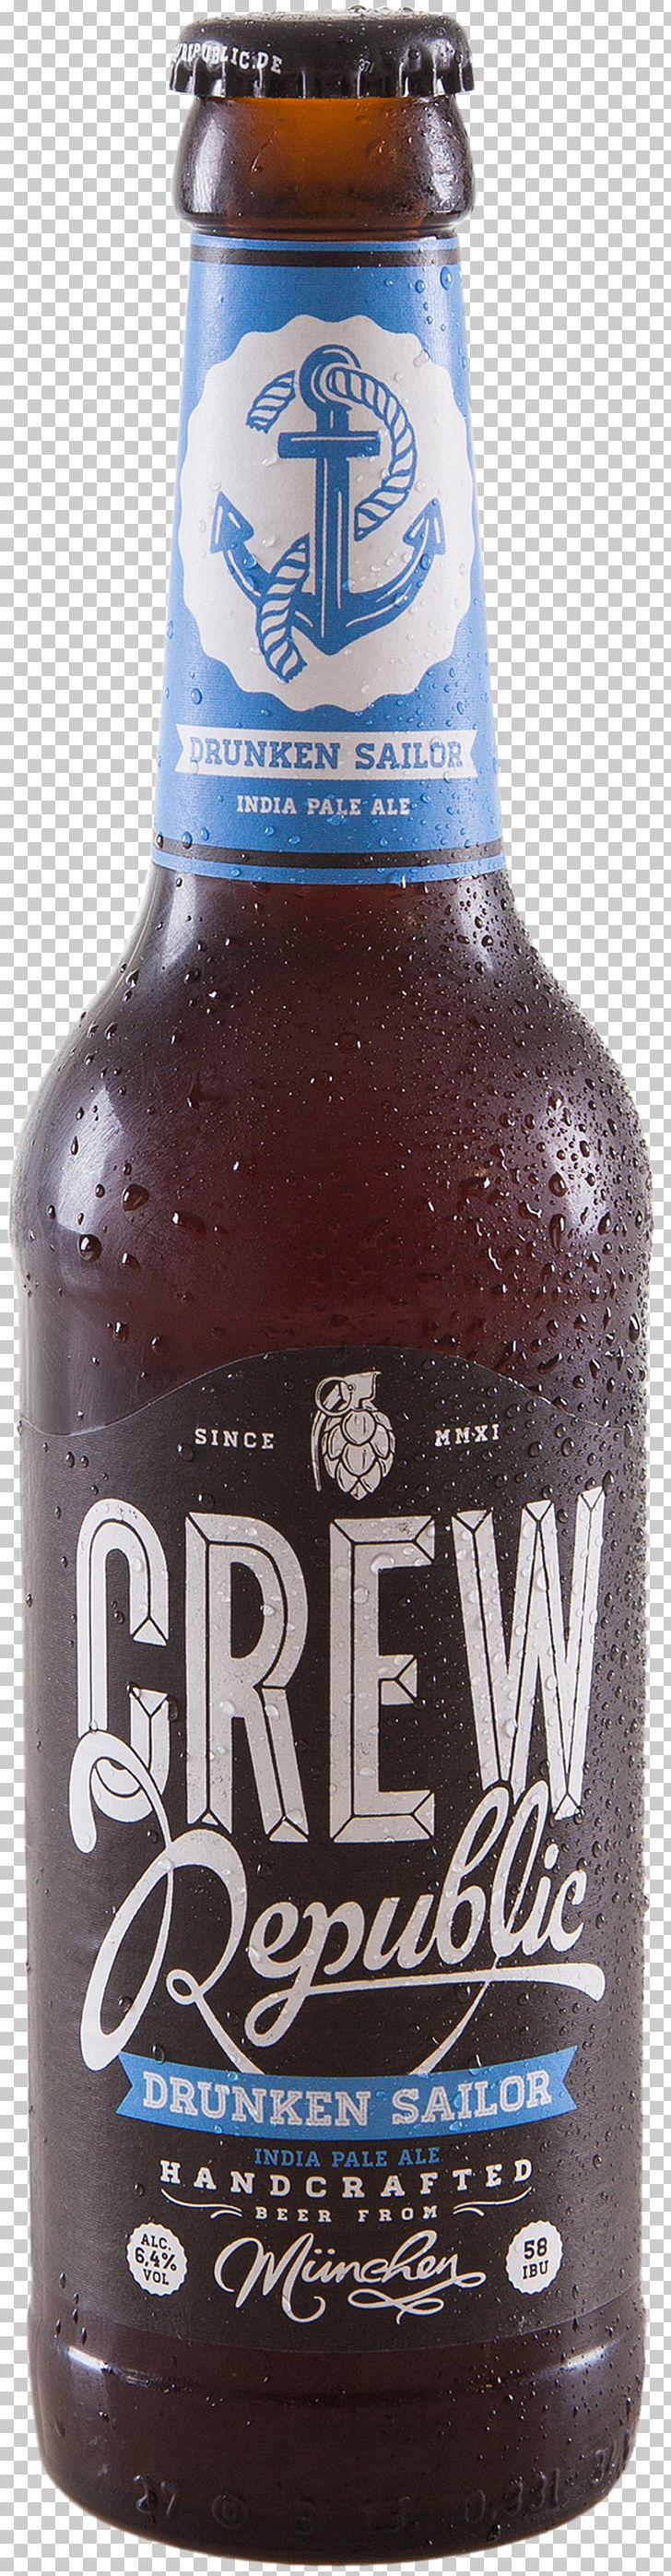 CREW Republic Beer India Pale Ale PNG, Clipart, Alcoholic Beverage, Ale, Beer, Beer Bottle, Beer Brewing Grains Malts Free PNG Download